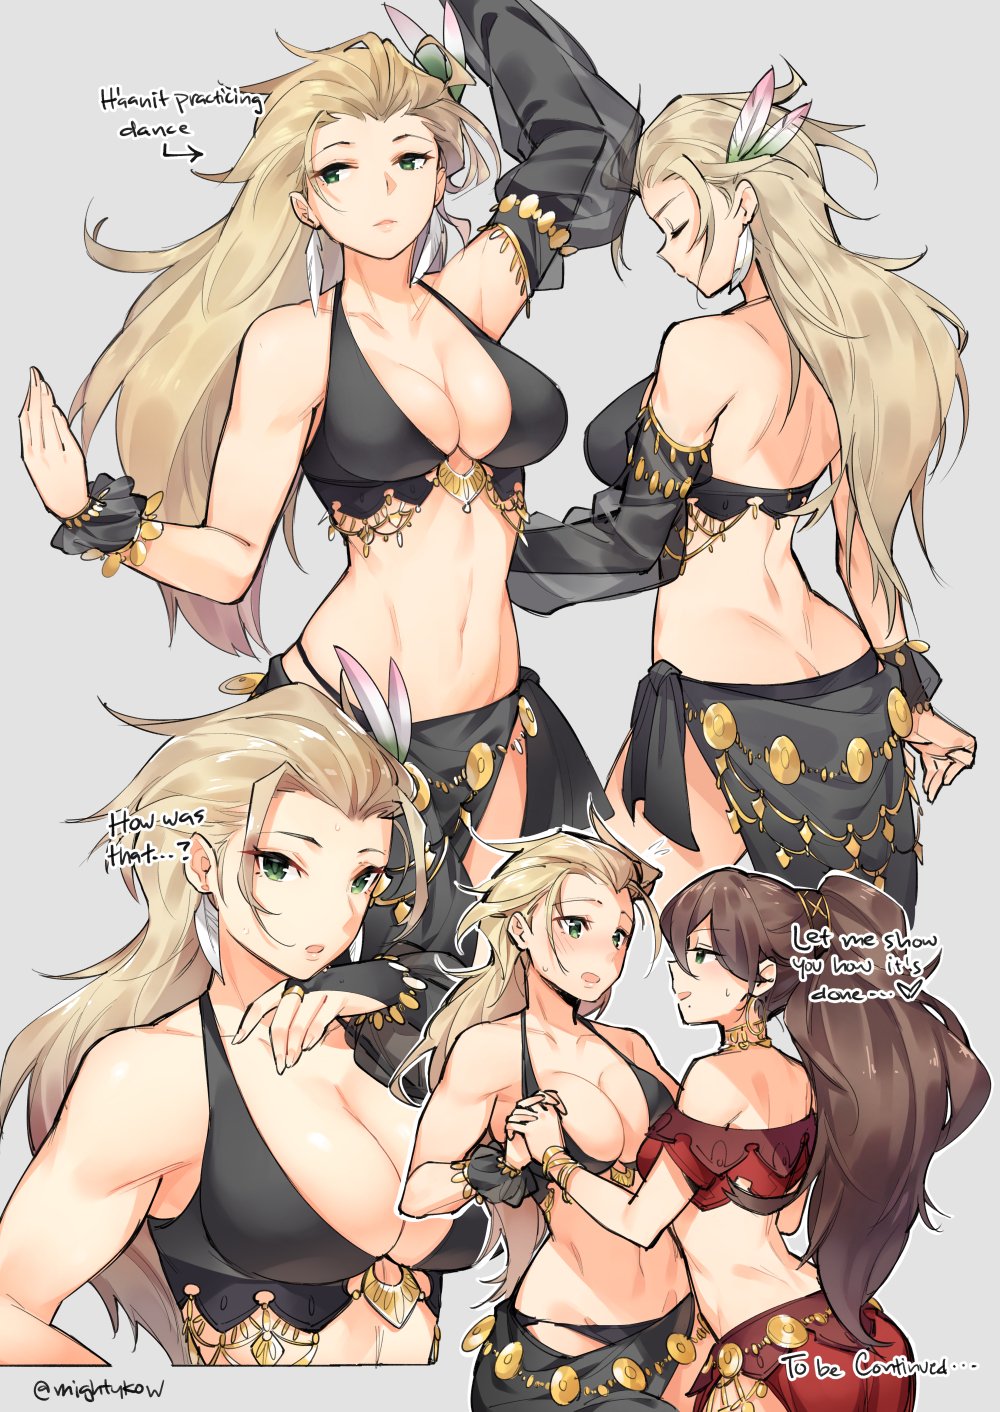 2girls arms_up black_dress blonde_hair brown_hair chain dancer dress expressionless feathers gebyy-terar gold_chain green_eyes h'aanit_(octopath_traveler) highres holding_hands multiple_girls multiple_views no_bangs octopath_traveler ponytail primrose_azelhart red_dress to_be_continued yuri